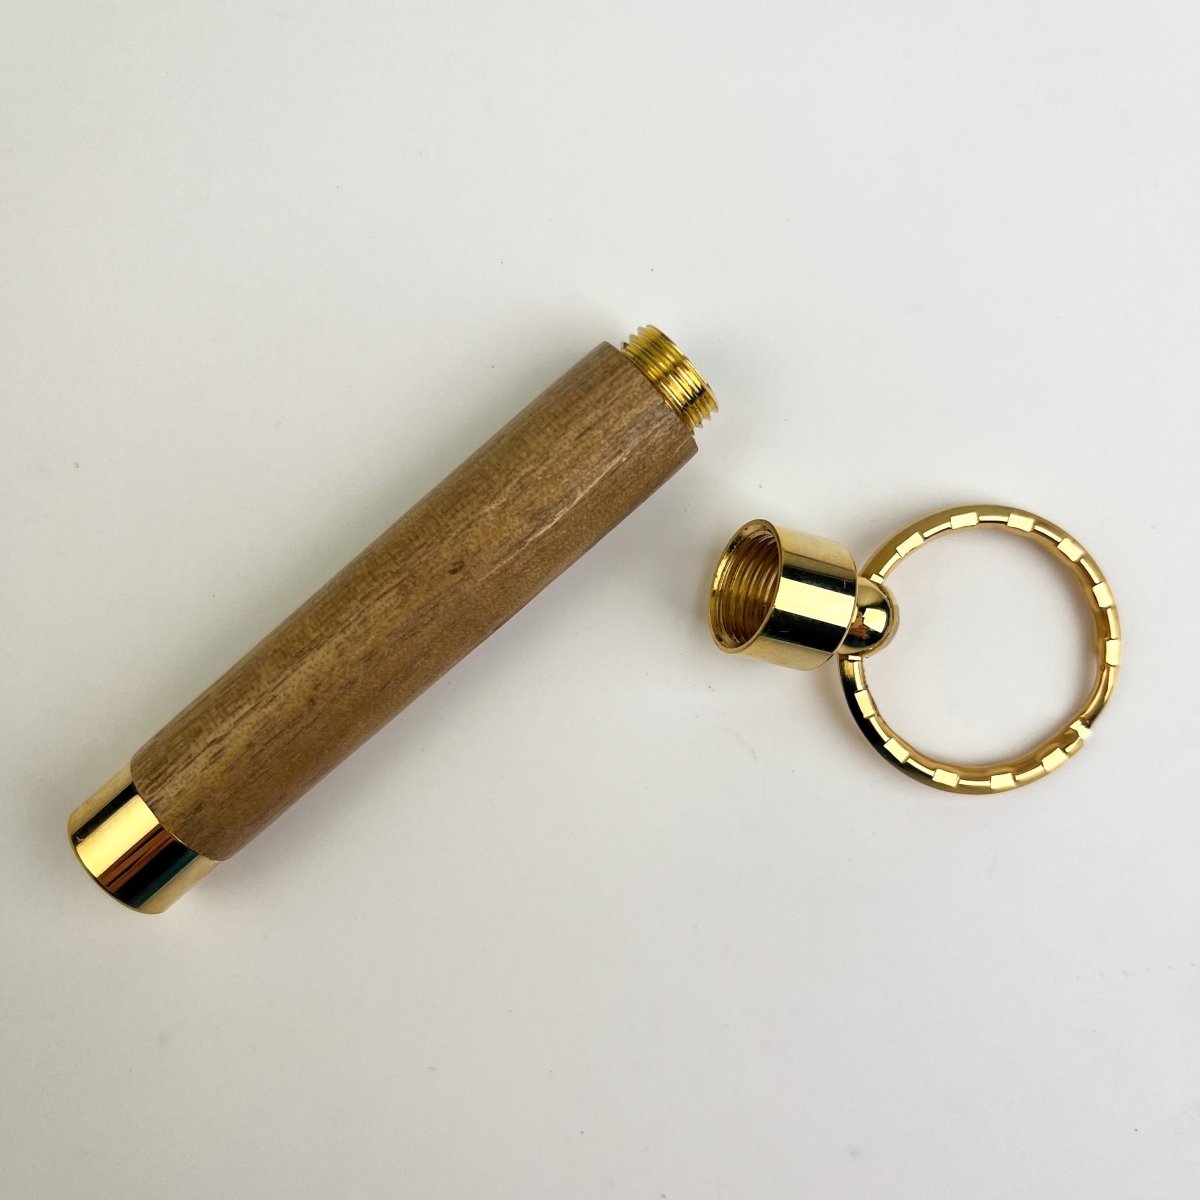 Handmade Wooden Needle Case with Keyring